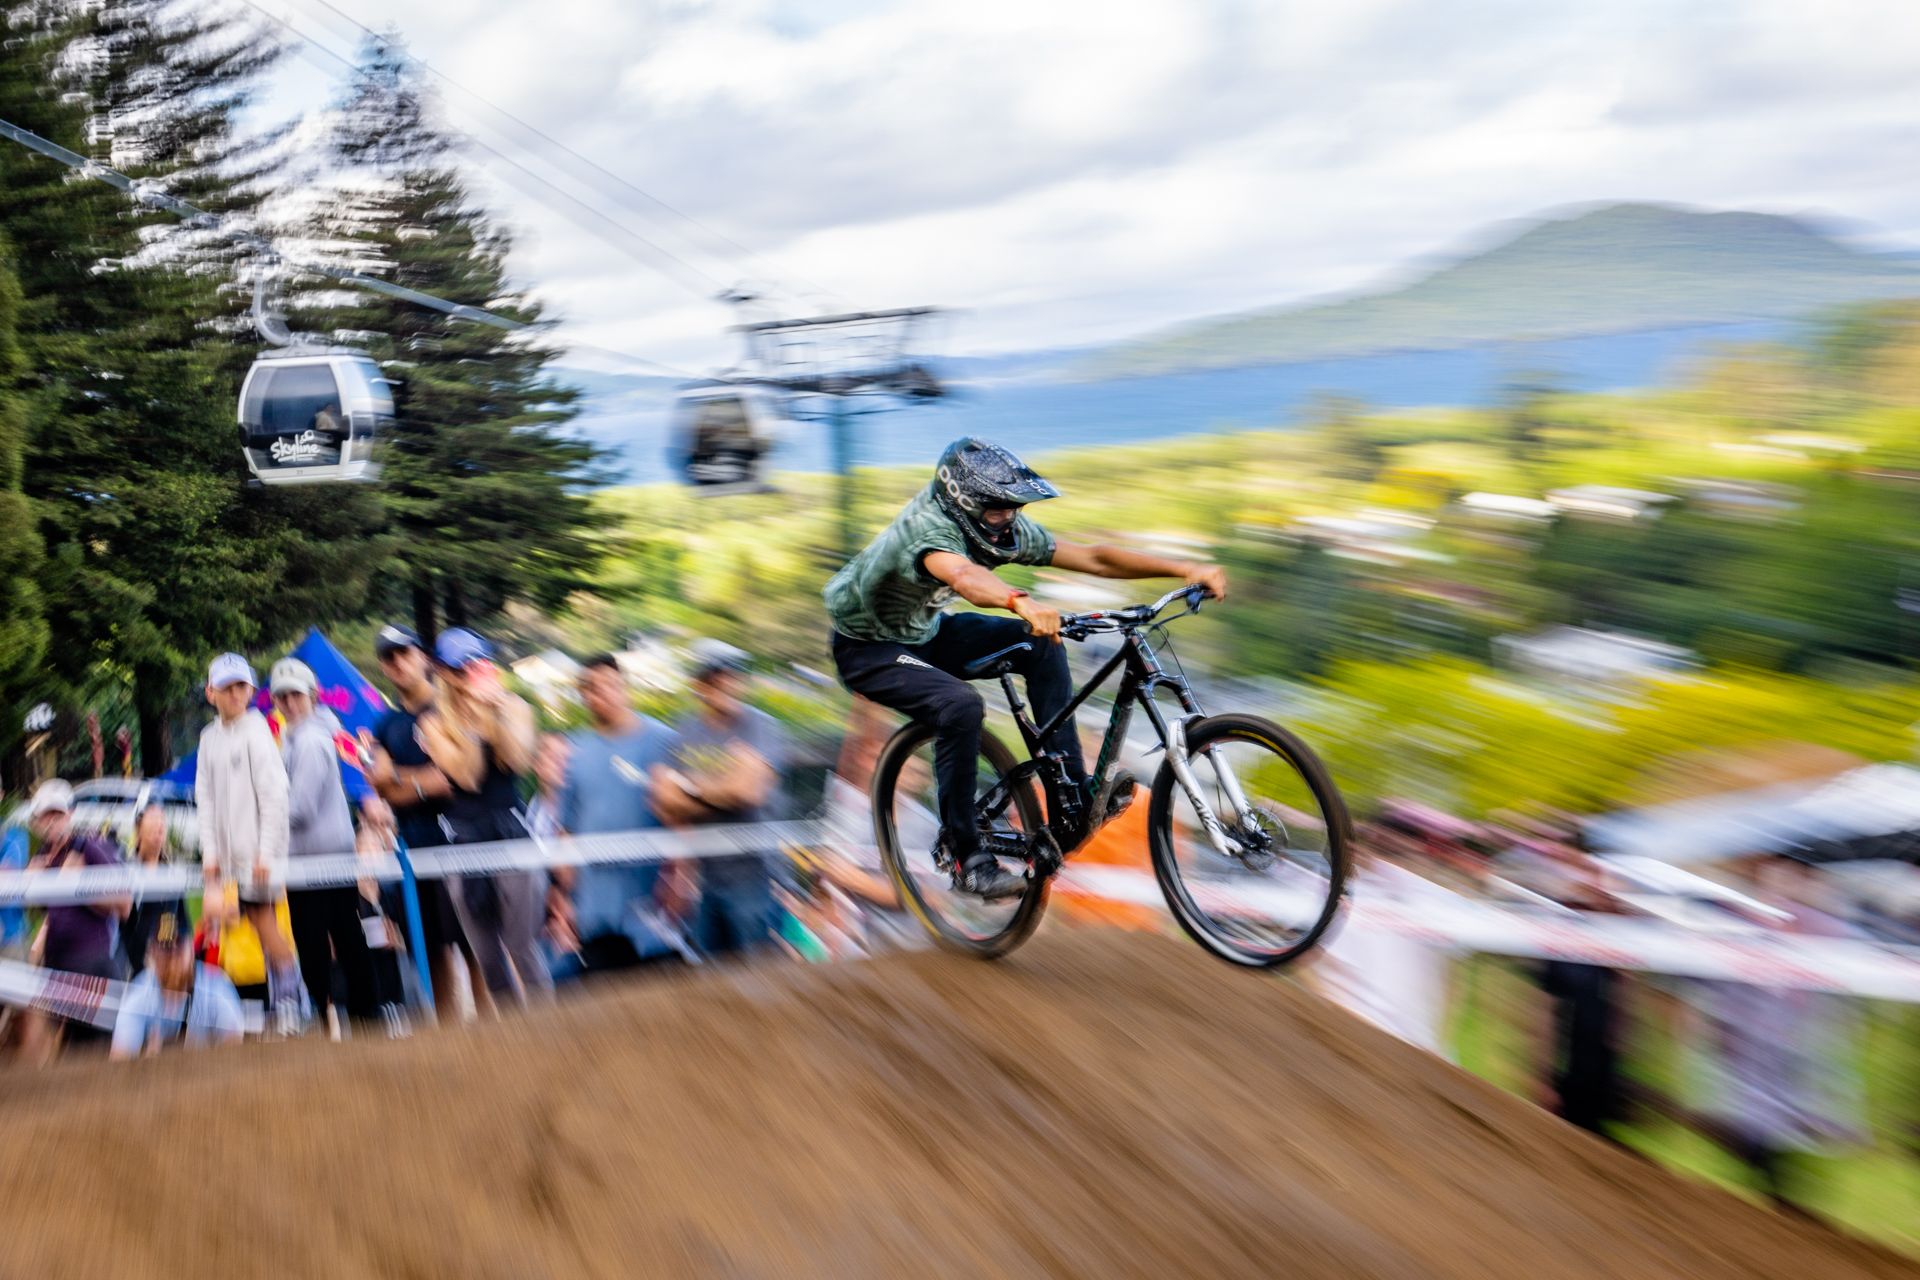 This photo was taken at the Crankworx Rotorua Mountain Biking Festival at an event called Speed N' Style.  The race is between 2 athletes on mountain bikes, mixing in tricks and flips, with speed and ability over various jumps and features.  I captured this image by performing a "zoom pull" with a slow shutter speed to create the effect that this athlete was travelling at 'warp speed.'